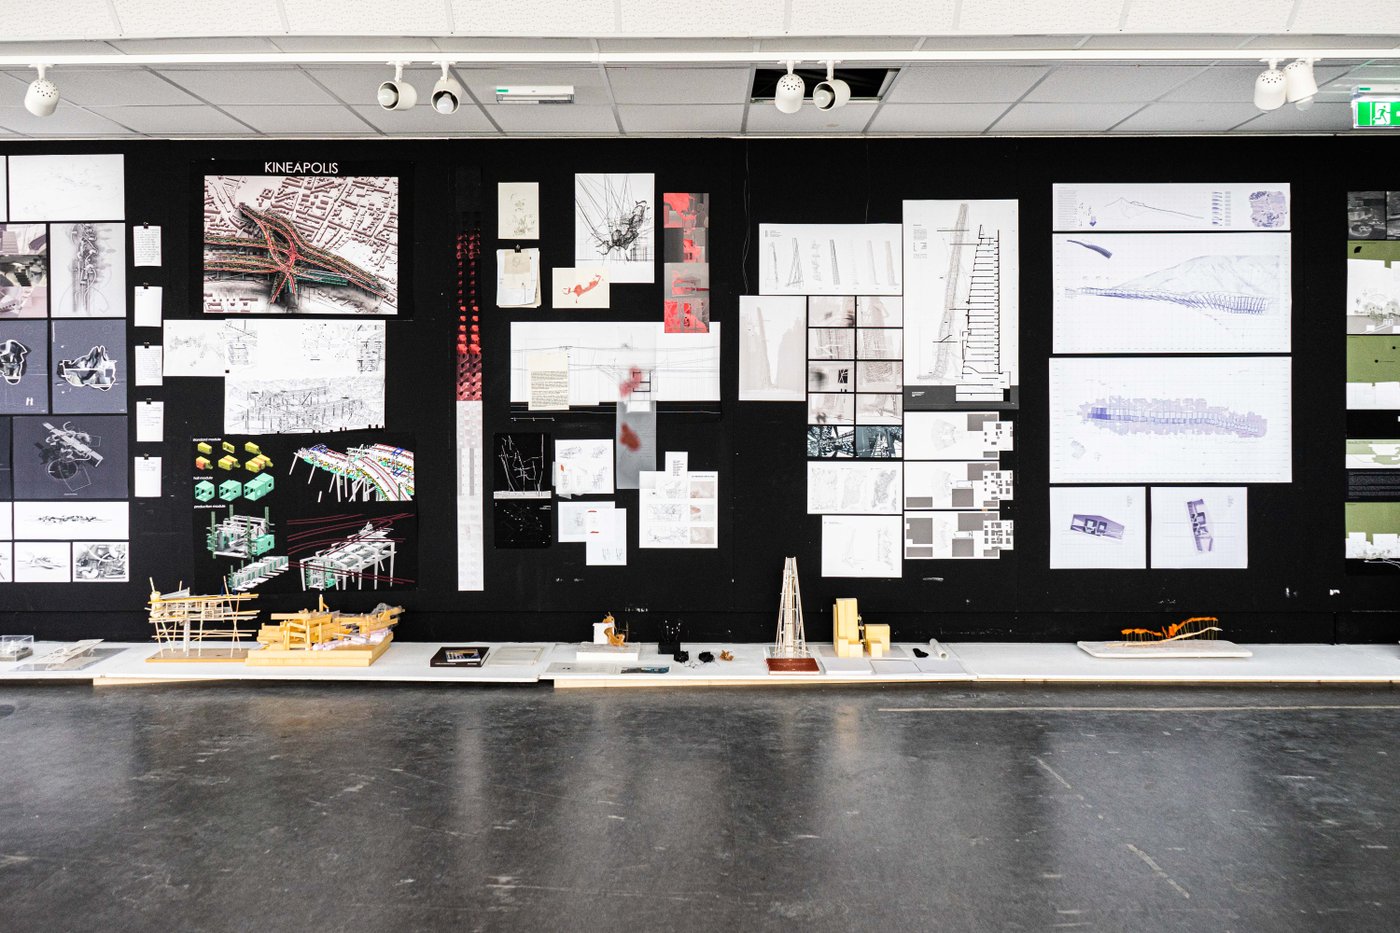 Different plans are displayed on a black wall, with corresponding architectural models in front of them on horizontal panels.